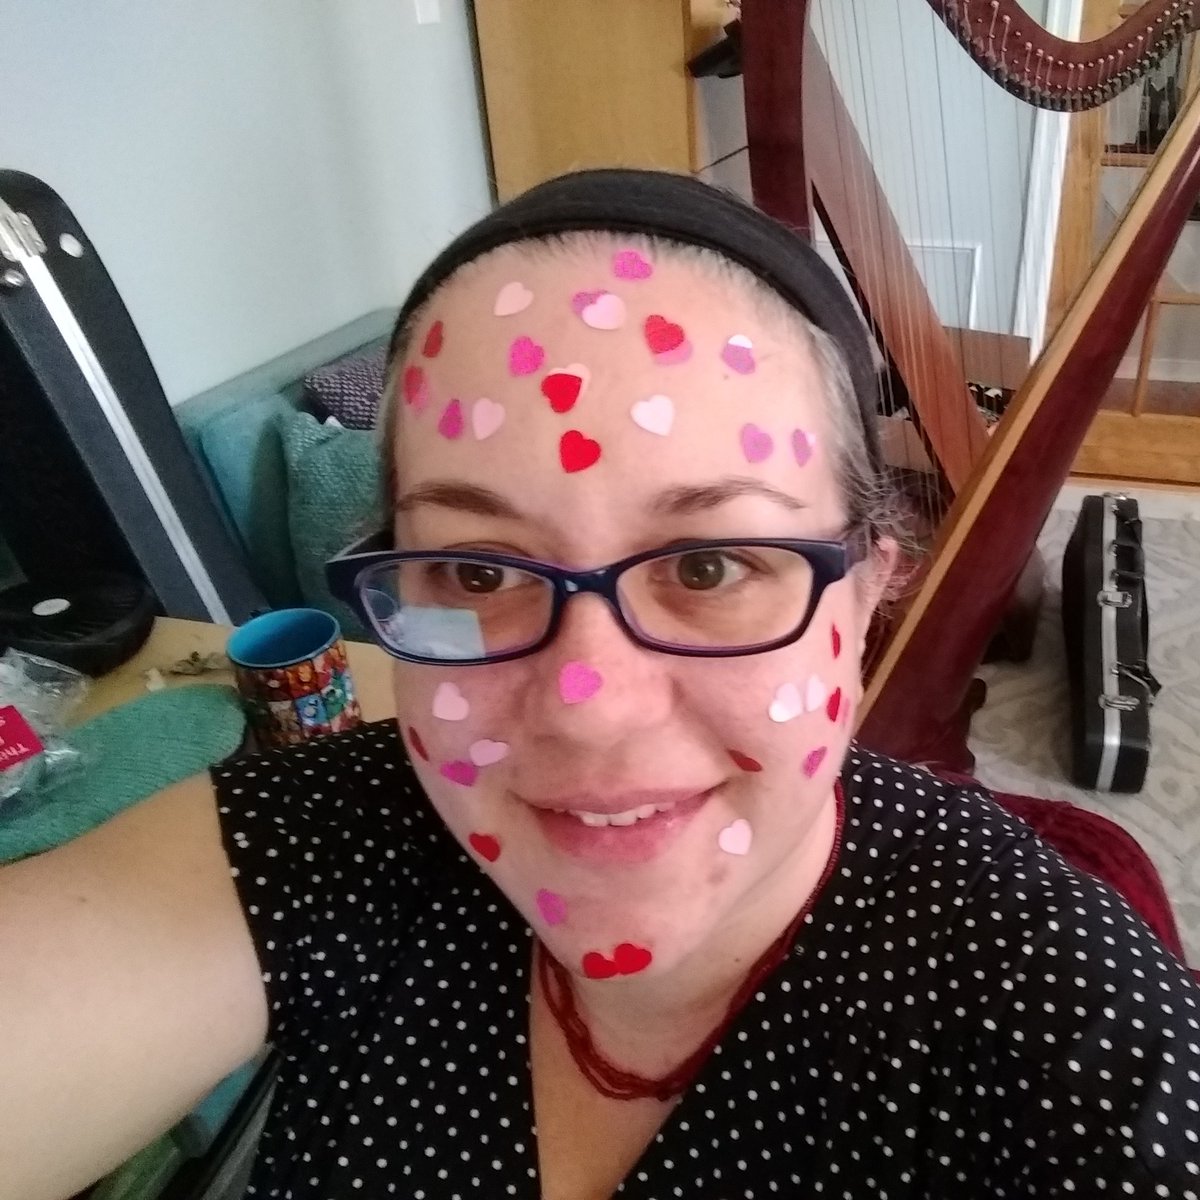 Every time a music student played their instrument on camera or microphone, I added a sticker to my face today. This was my face after 6th grade orchestra. #orchestradirector #virtuallearning #teachertwitter